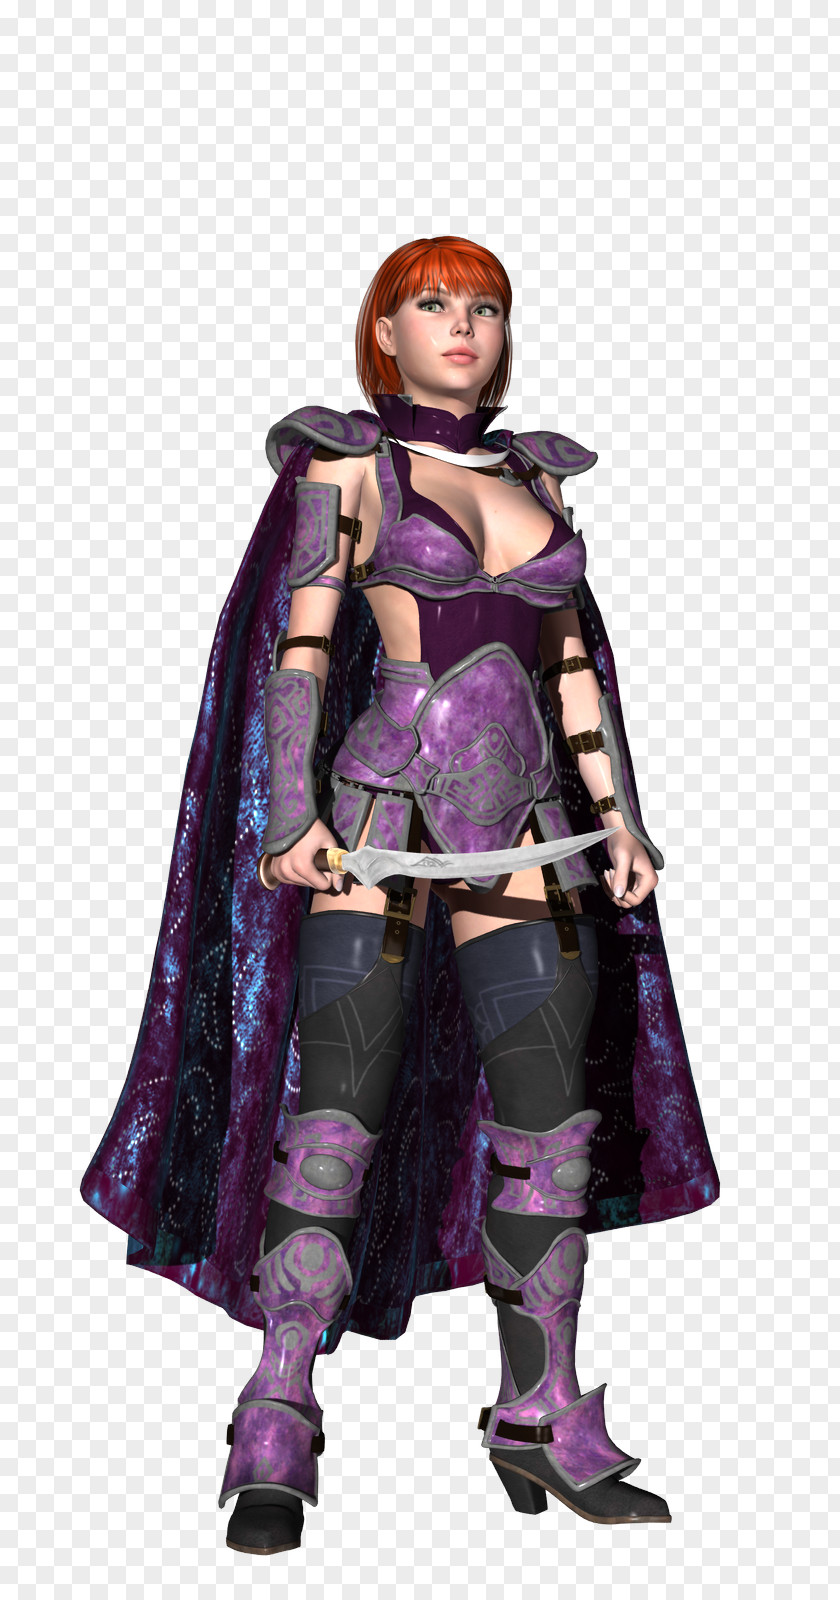 Female Thief Phishing Robe Costume Design Character Fiction PNG